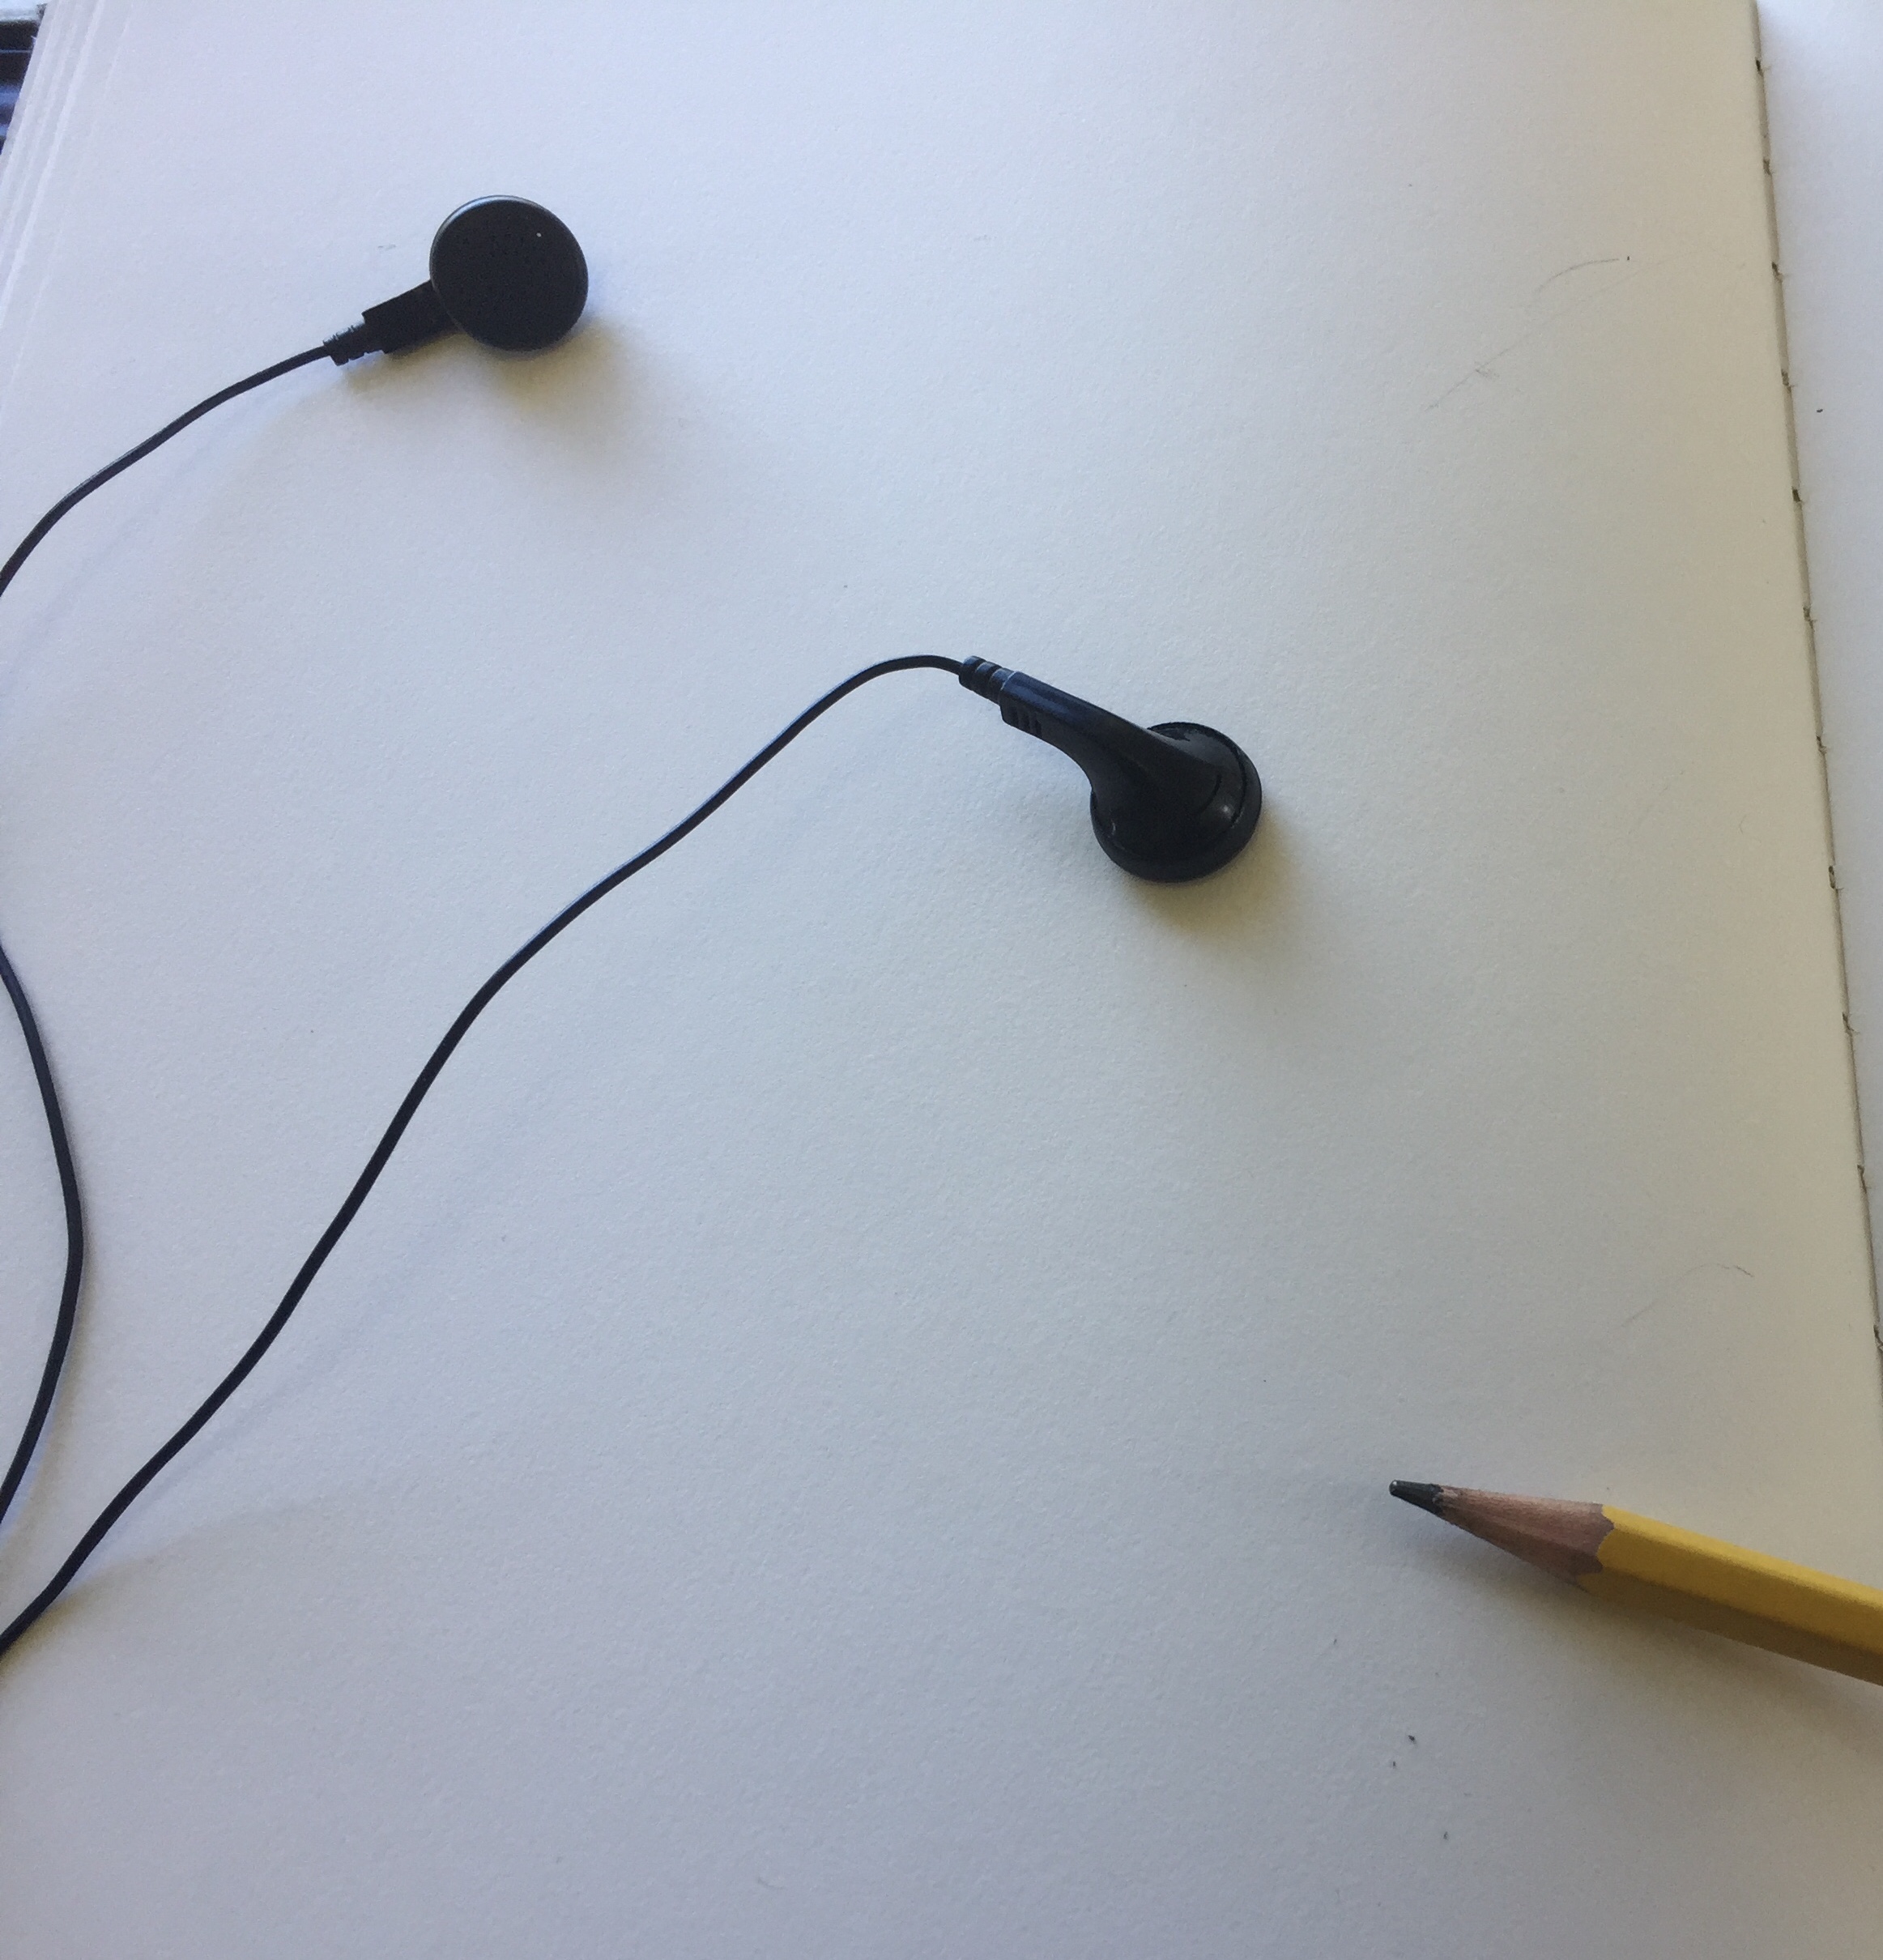 A picture of a page of a blank sketchbook, with earbuds and a pencil placed in the photograph.